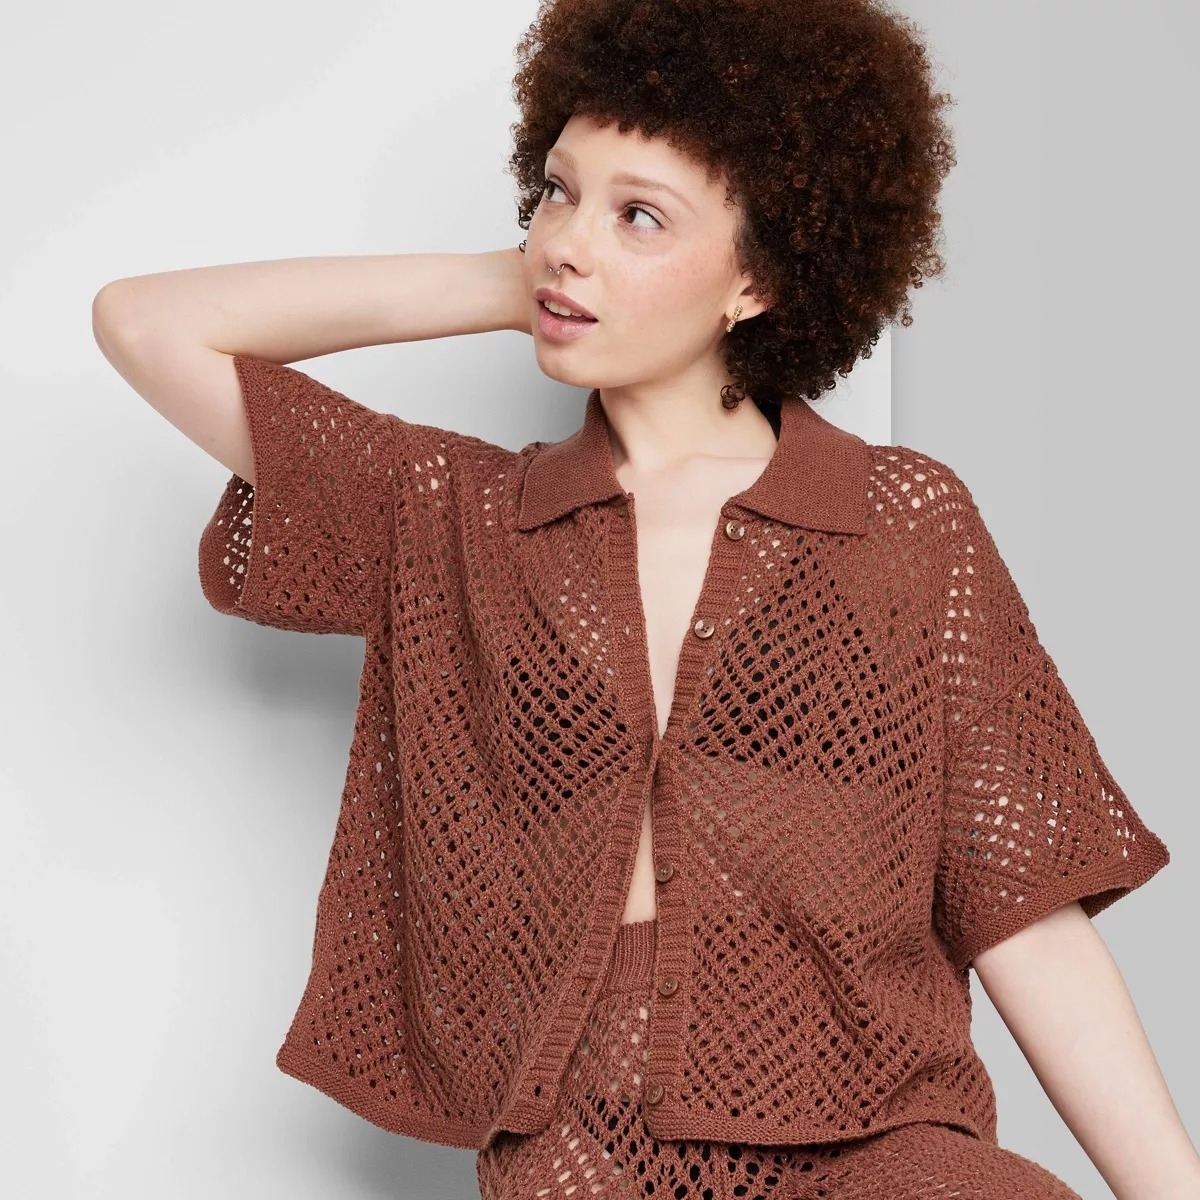 Model in a brown mesh button down short sleeve top